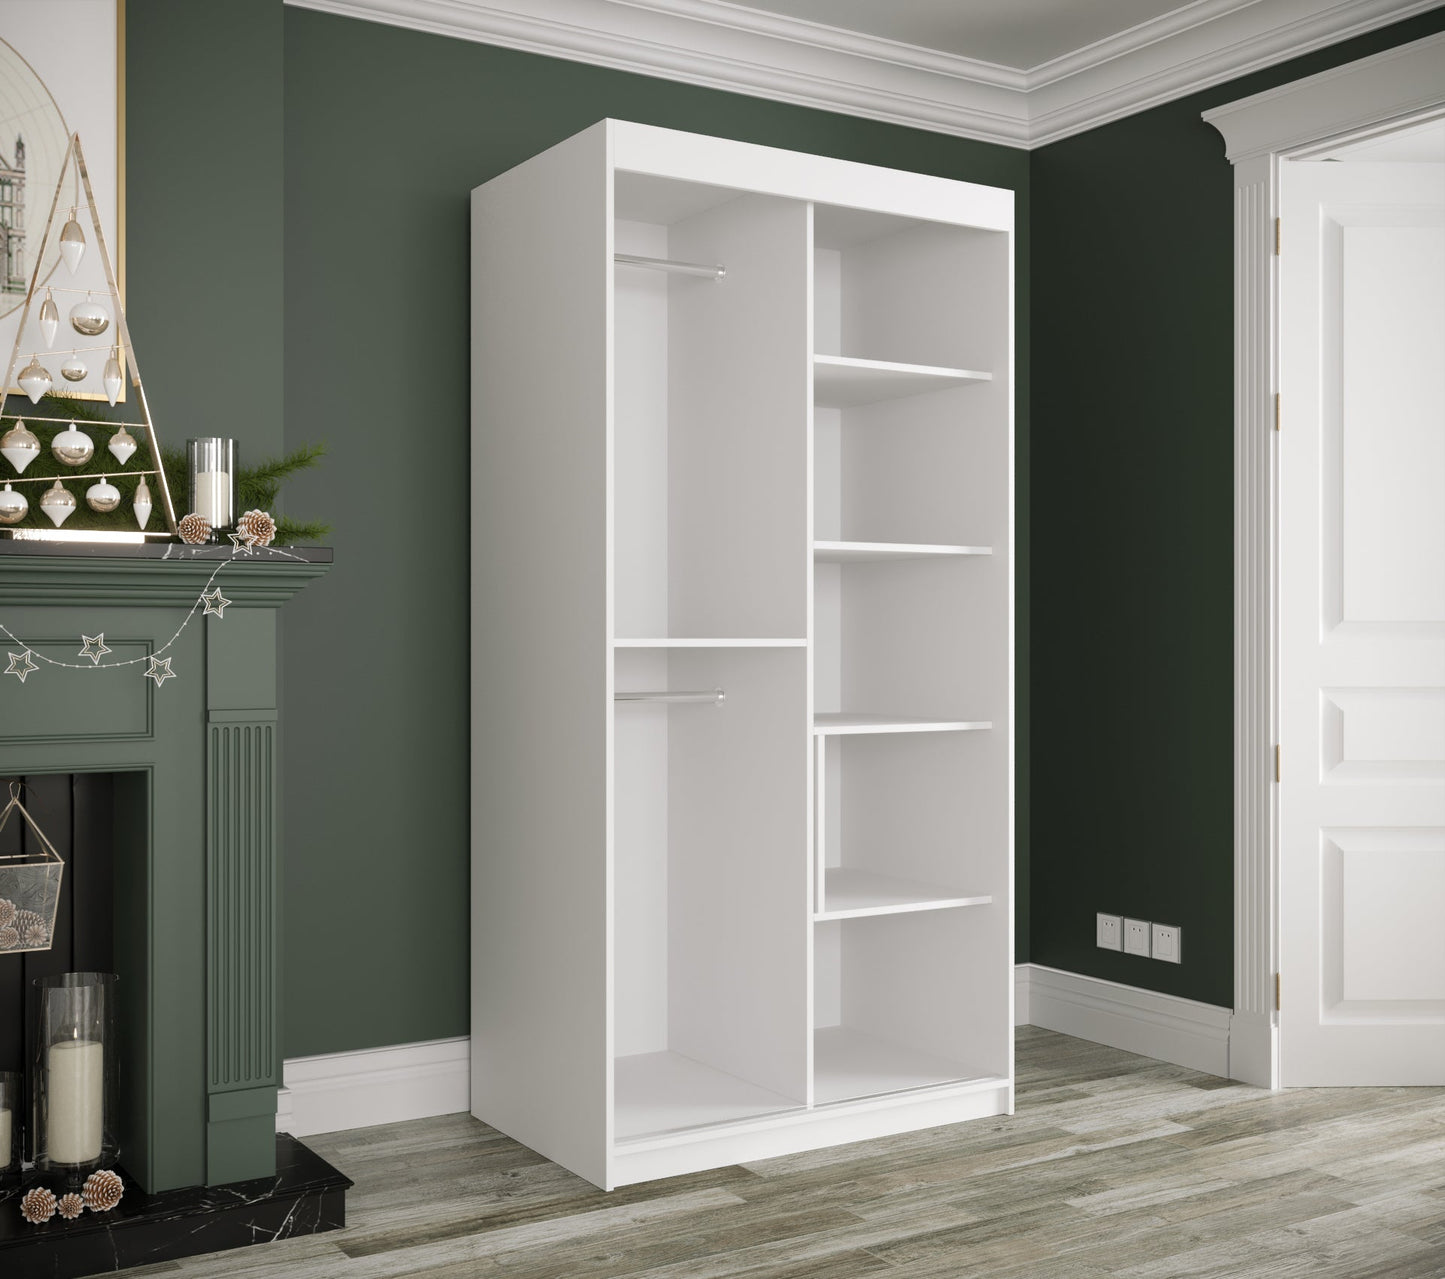 MARBLE T - Wardrobe with Sliding Doors, Shelves, 2 x Hanging Rails and Optional Drawers >120cm<